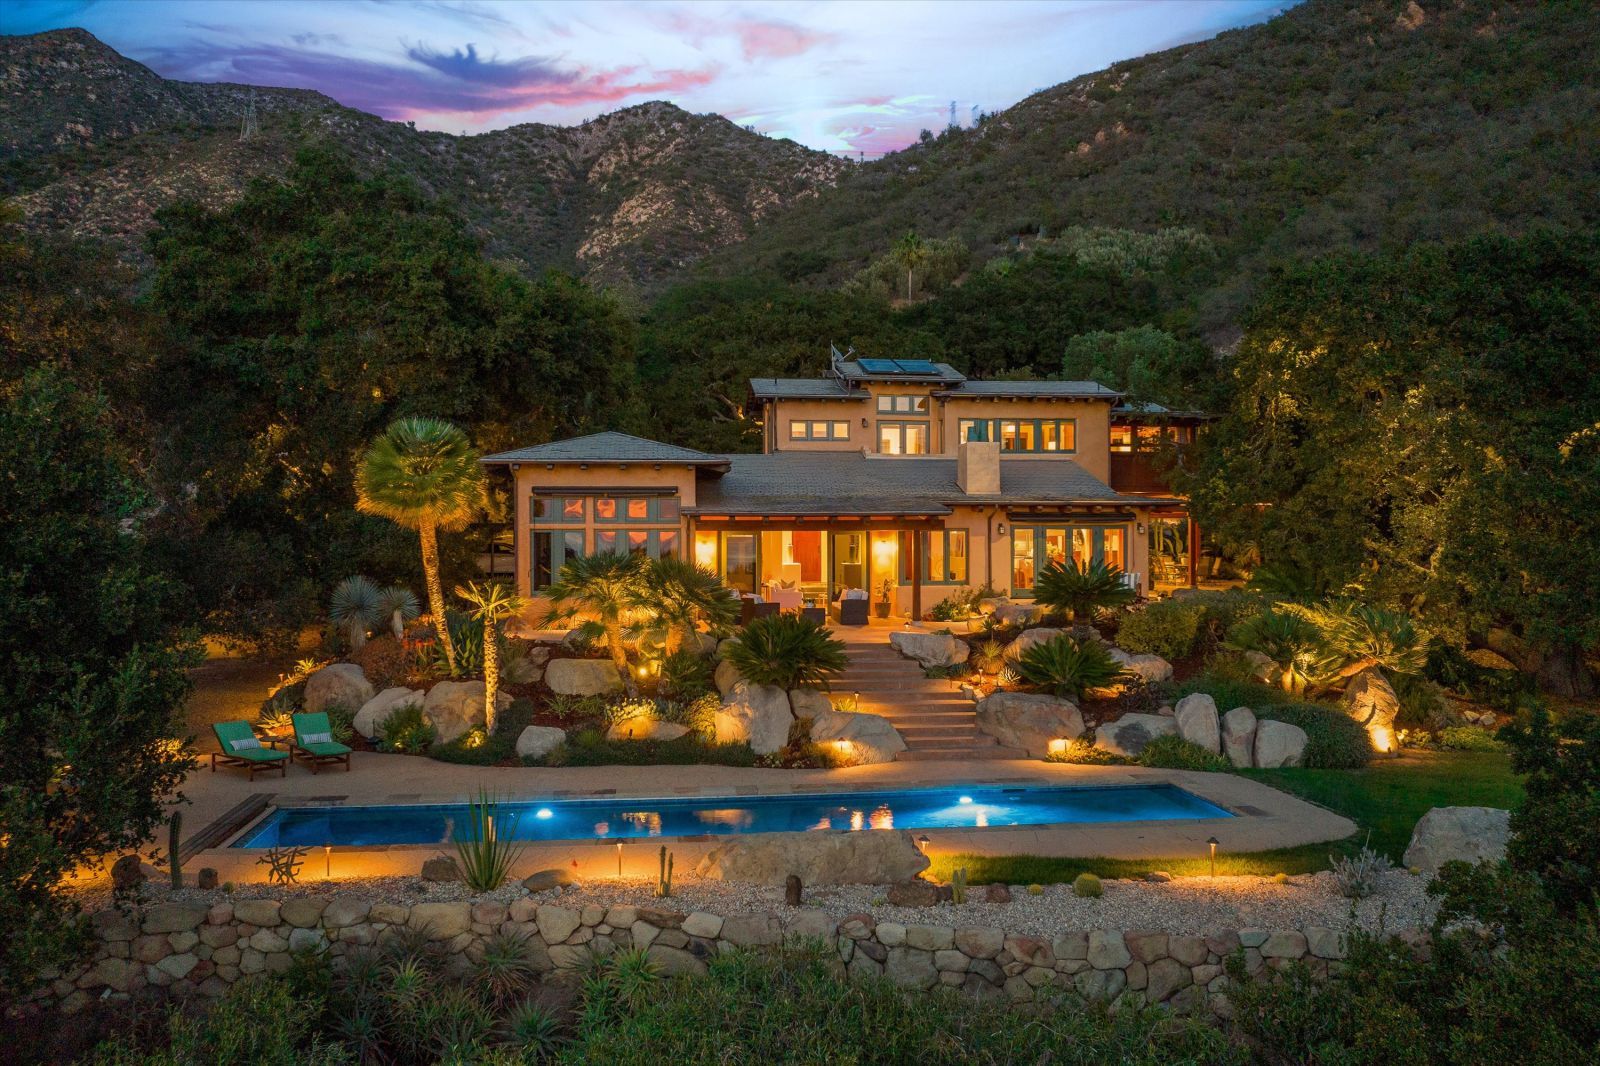 A luxury Montecito home all lit up at dusk and framed by majestic mountains with a pink, purple and blue sunset in the distance and a shimmering pool in the backyard.